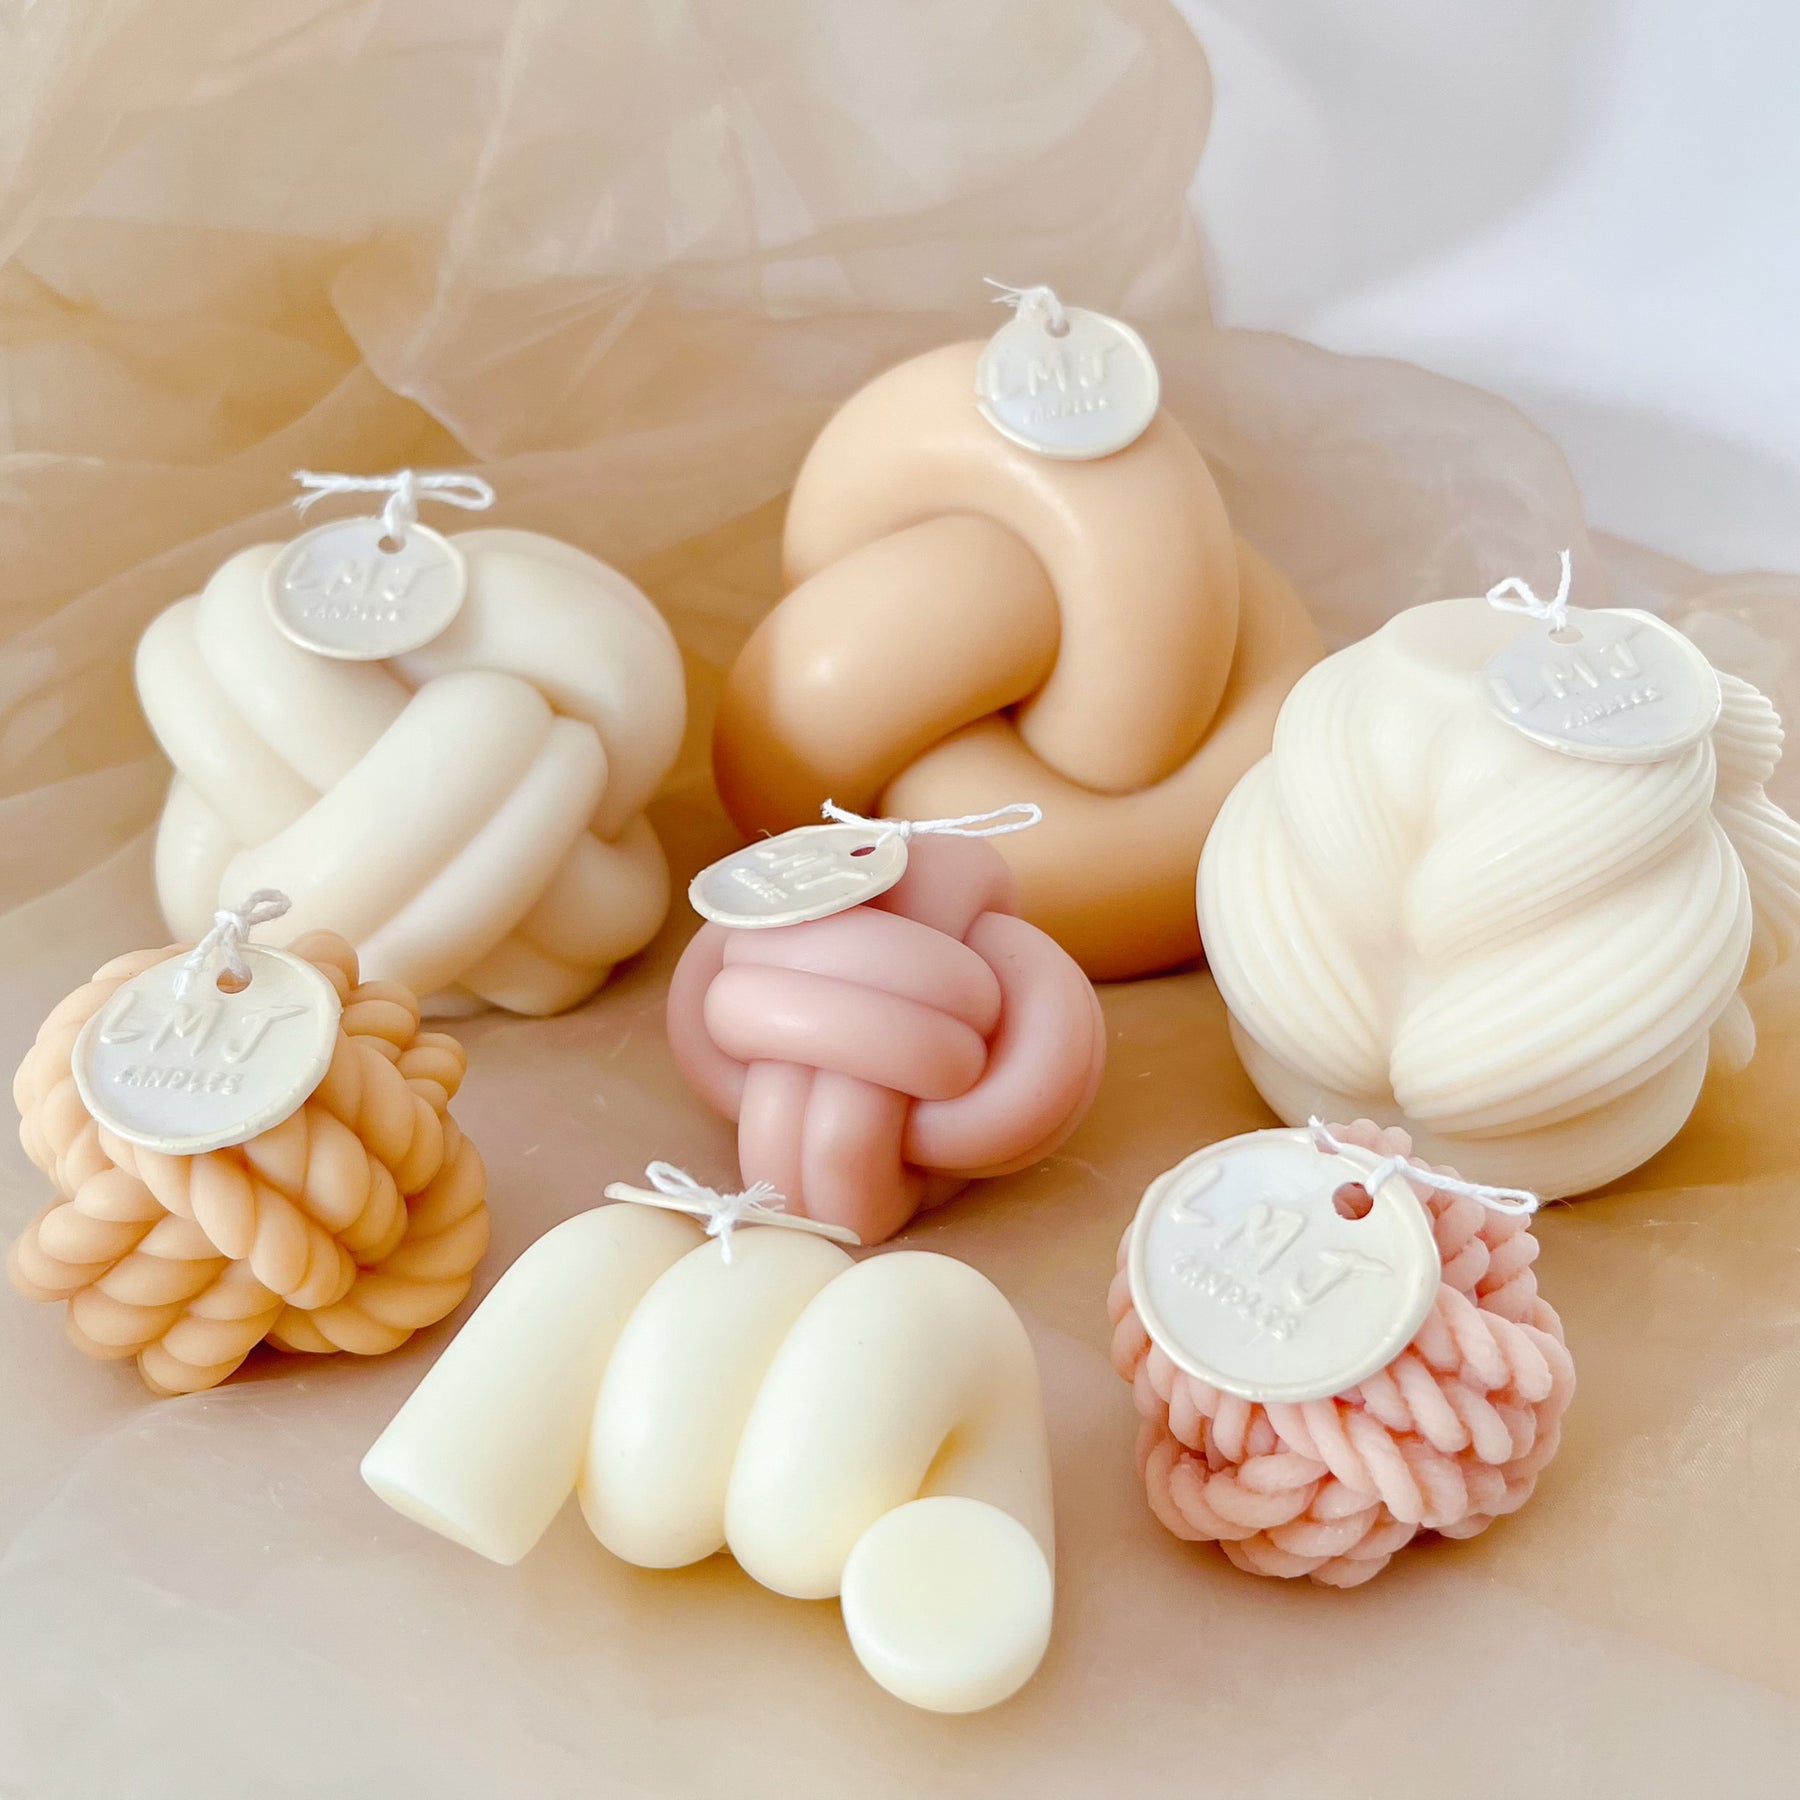 Knot Ball Scented Candle - Centerpiece Sculptural Candle | LMJ Candles